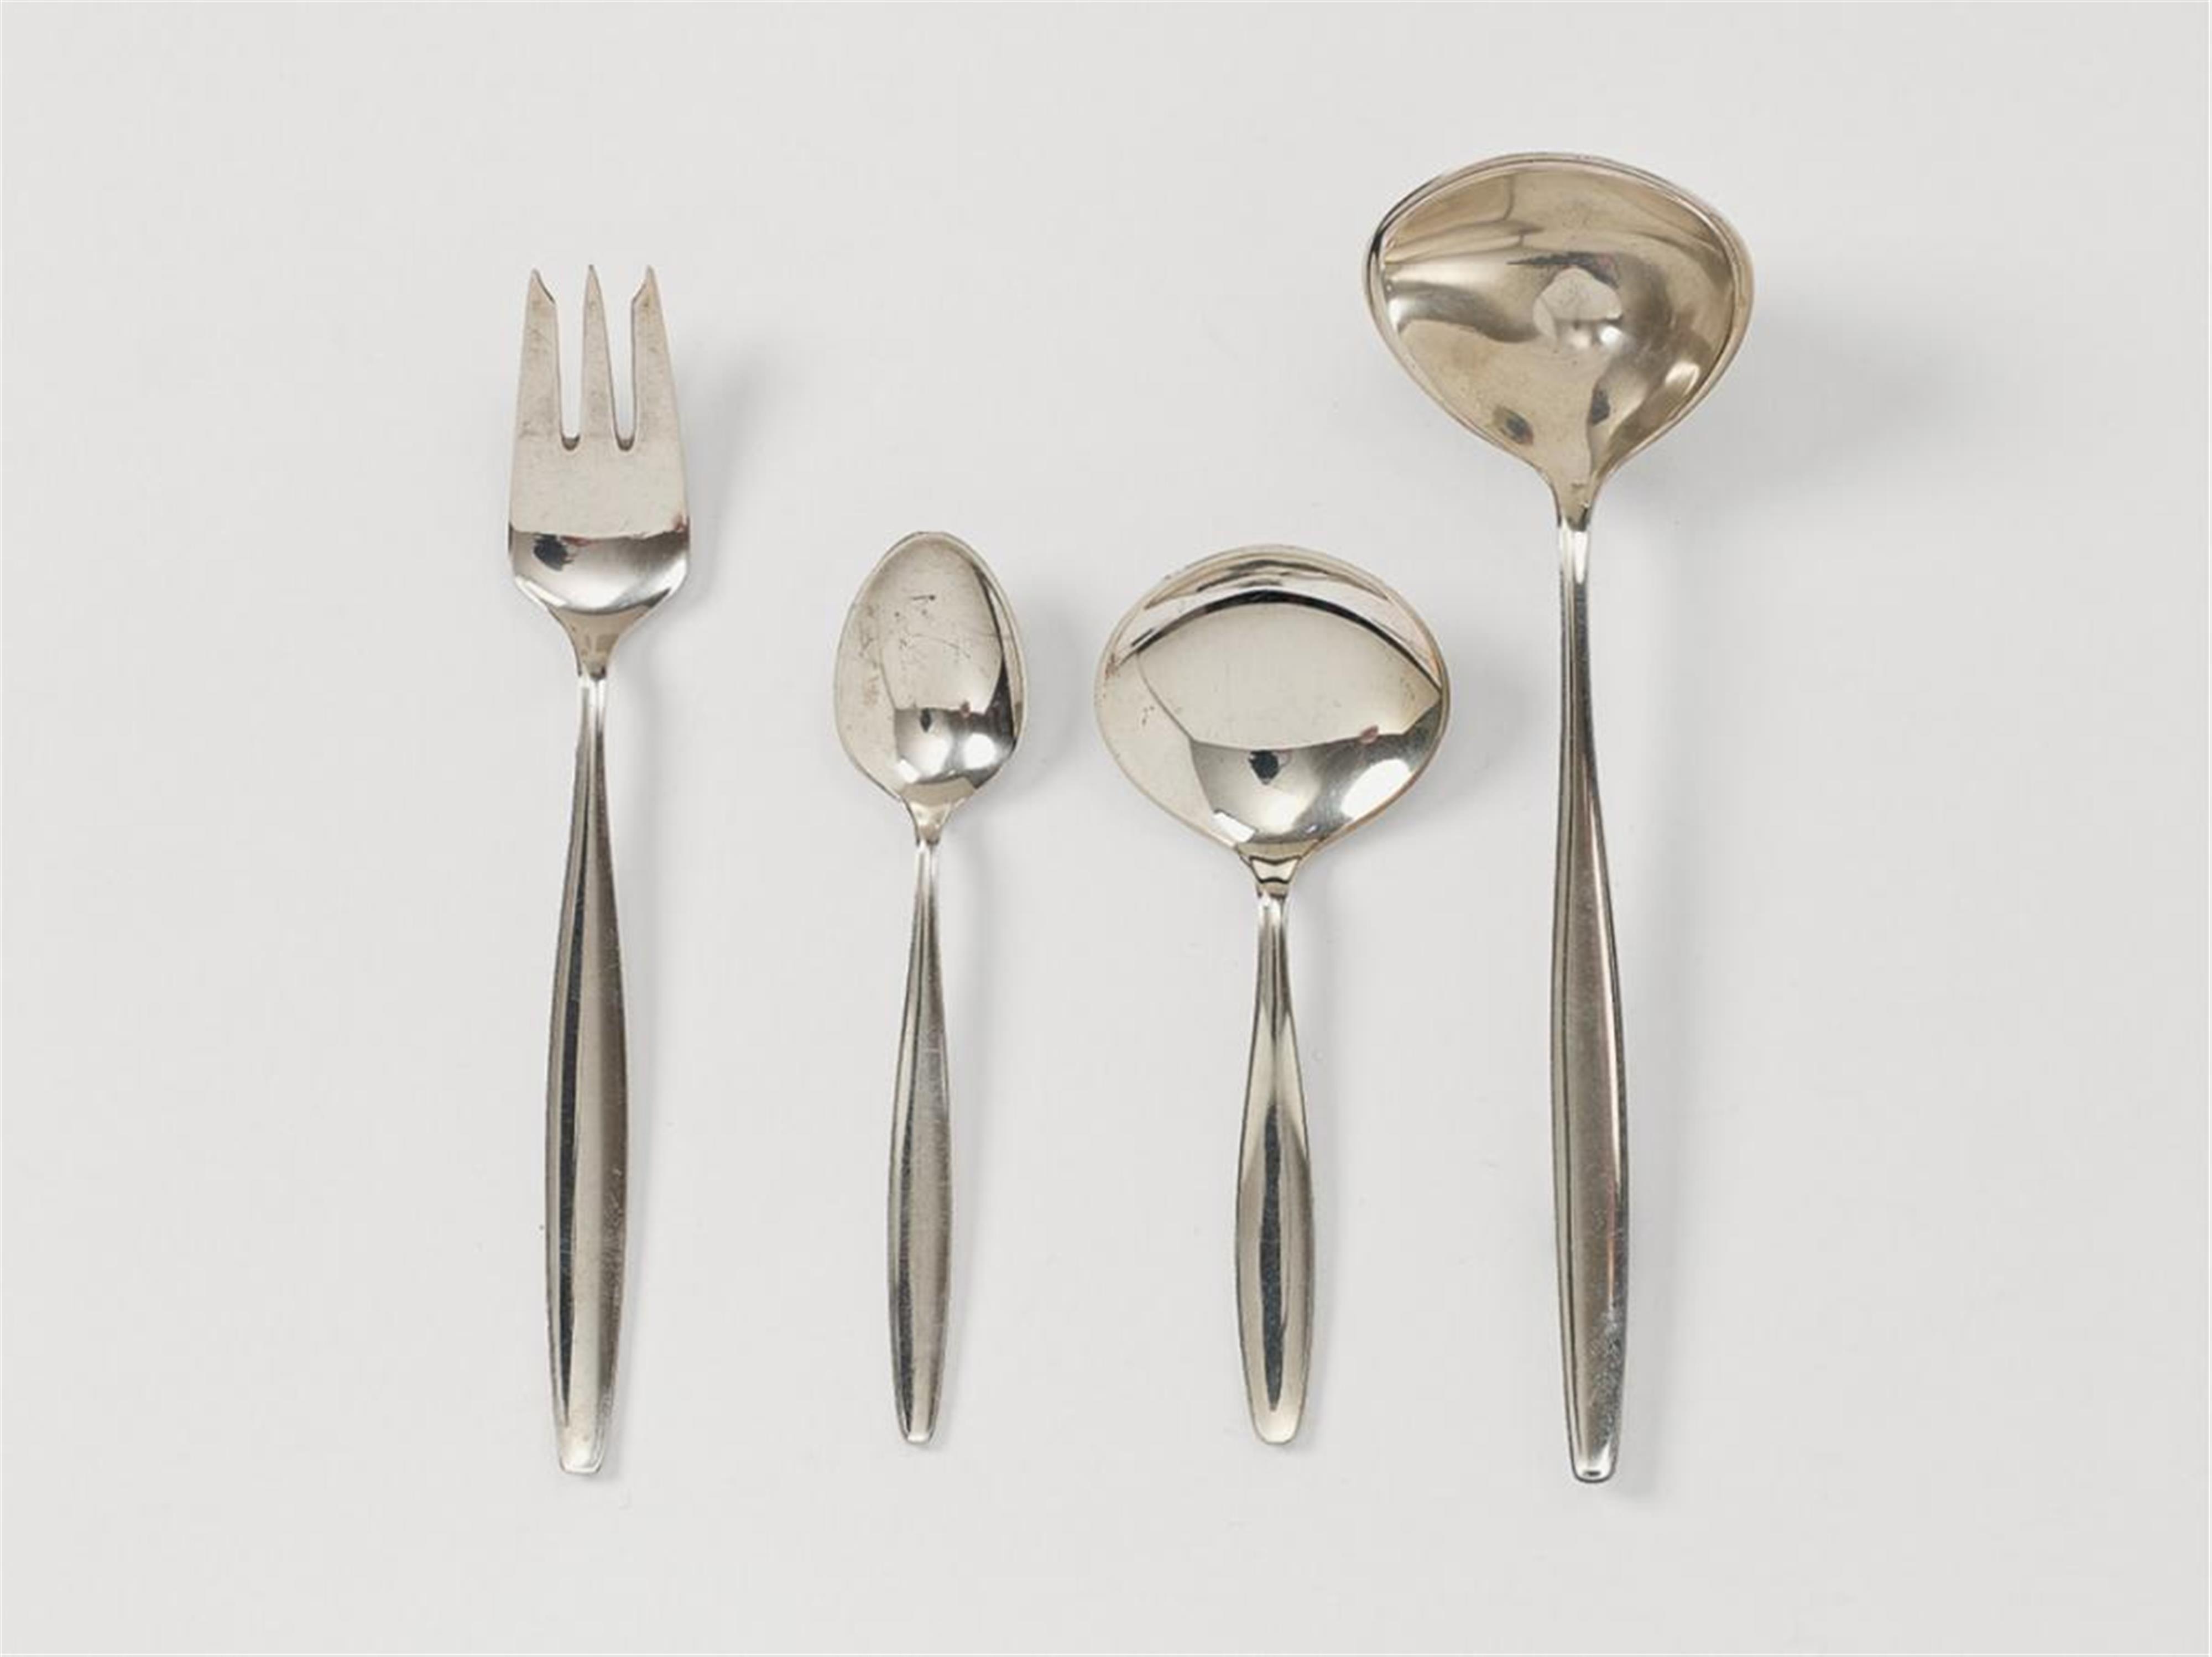 A silver Cypress pattern cutlery no. 99. Comprising six coffee spoons, six cake forks, sugar spoon and cream ladle. Design Tias Eckhoff 1954, made by Georg Jensen from 1954 - 76. - image-1